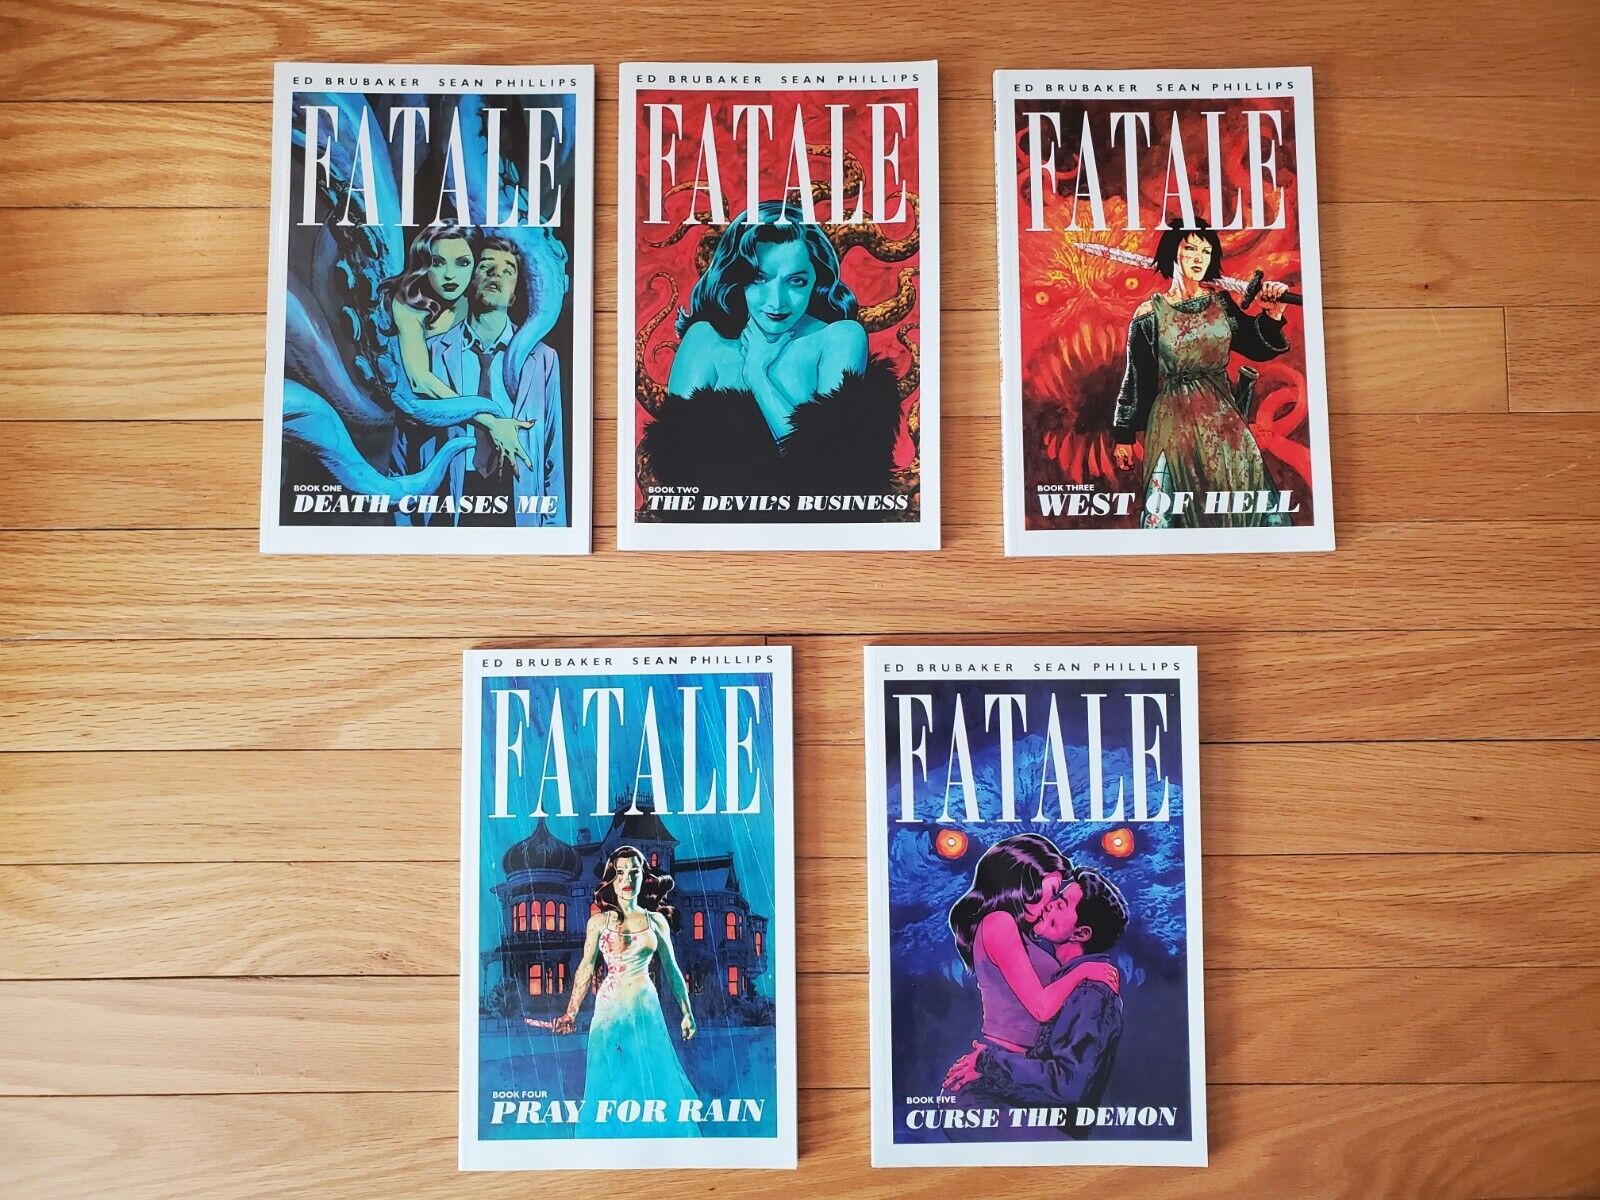 Fatale - Ed Brubaker and Sean Phillips - Complete 5 Volumes